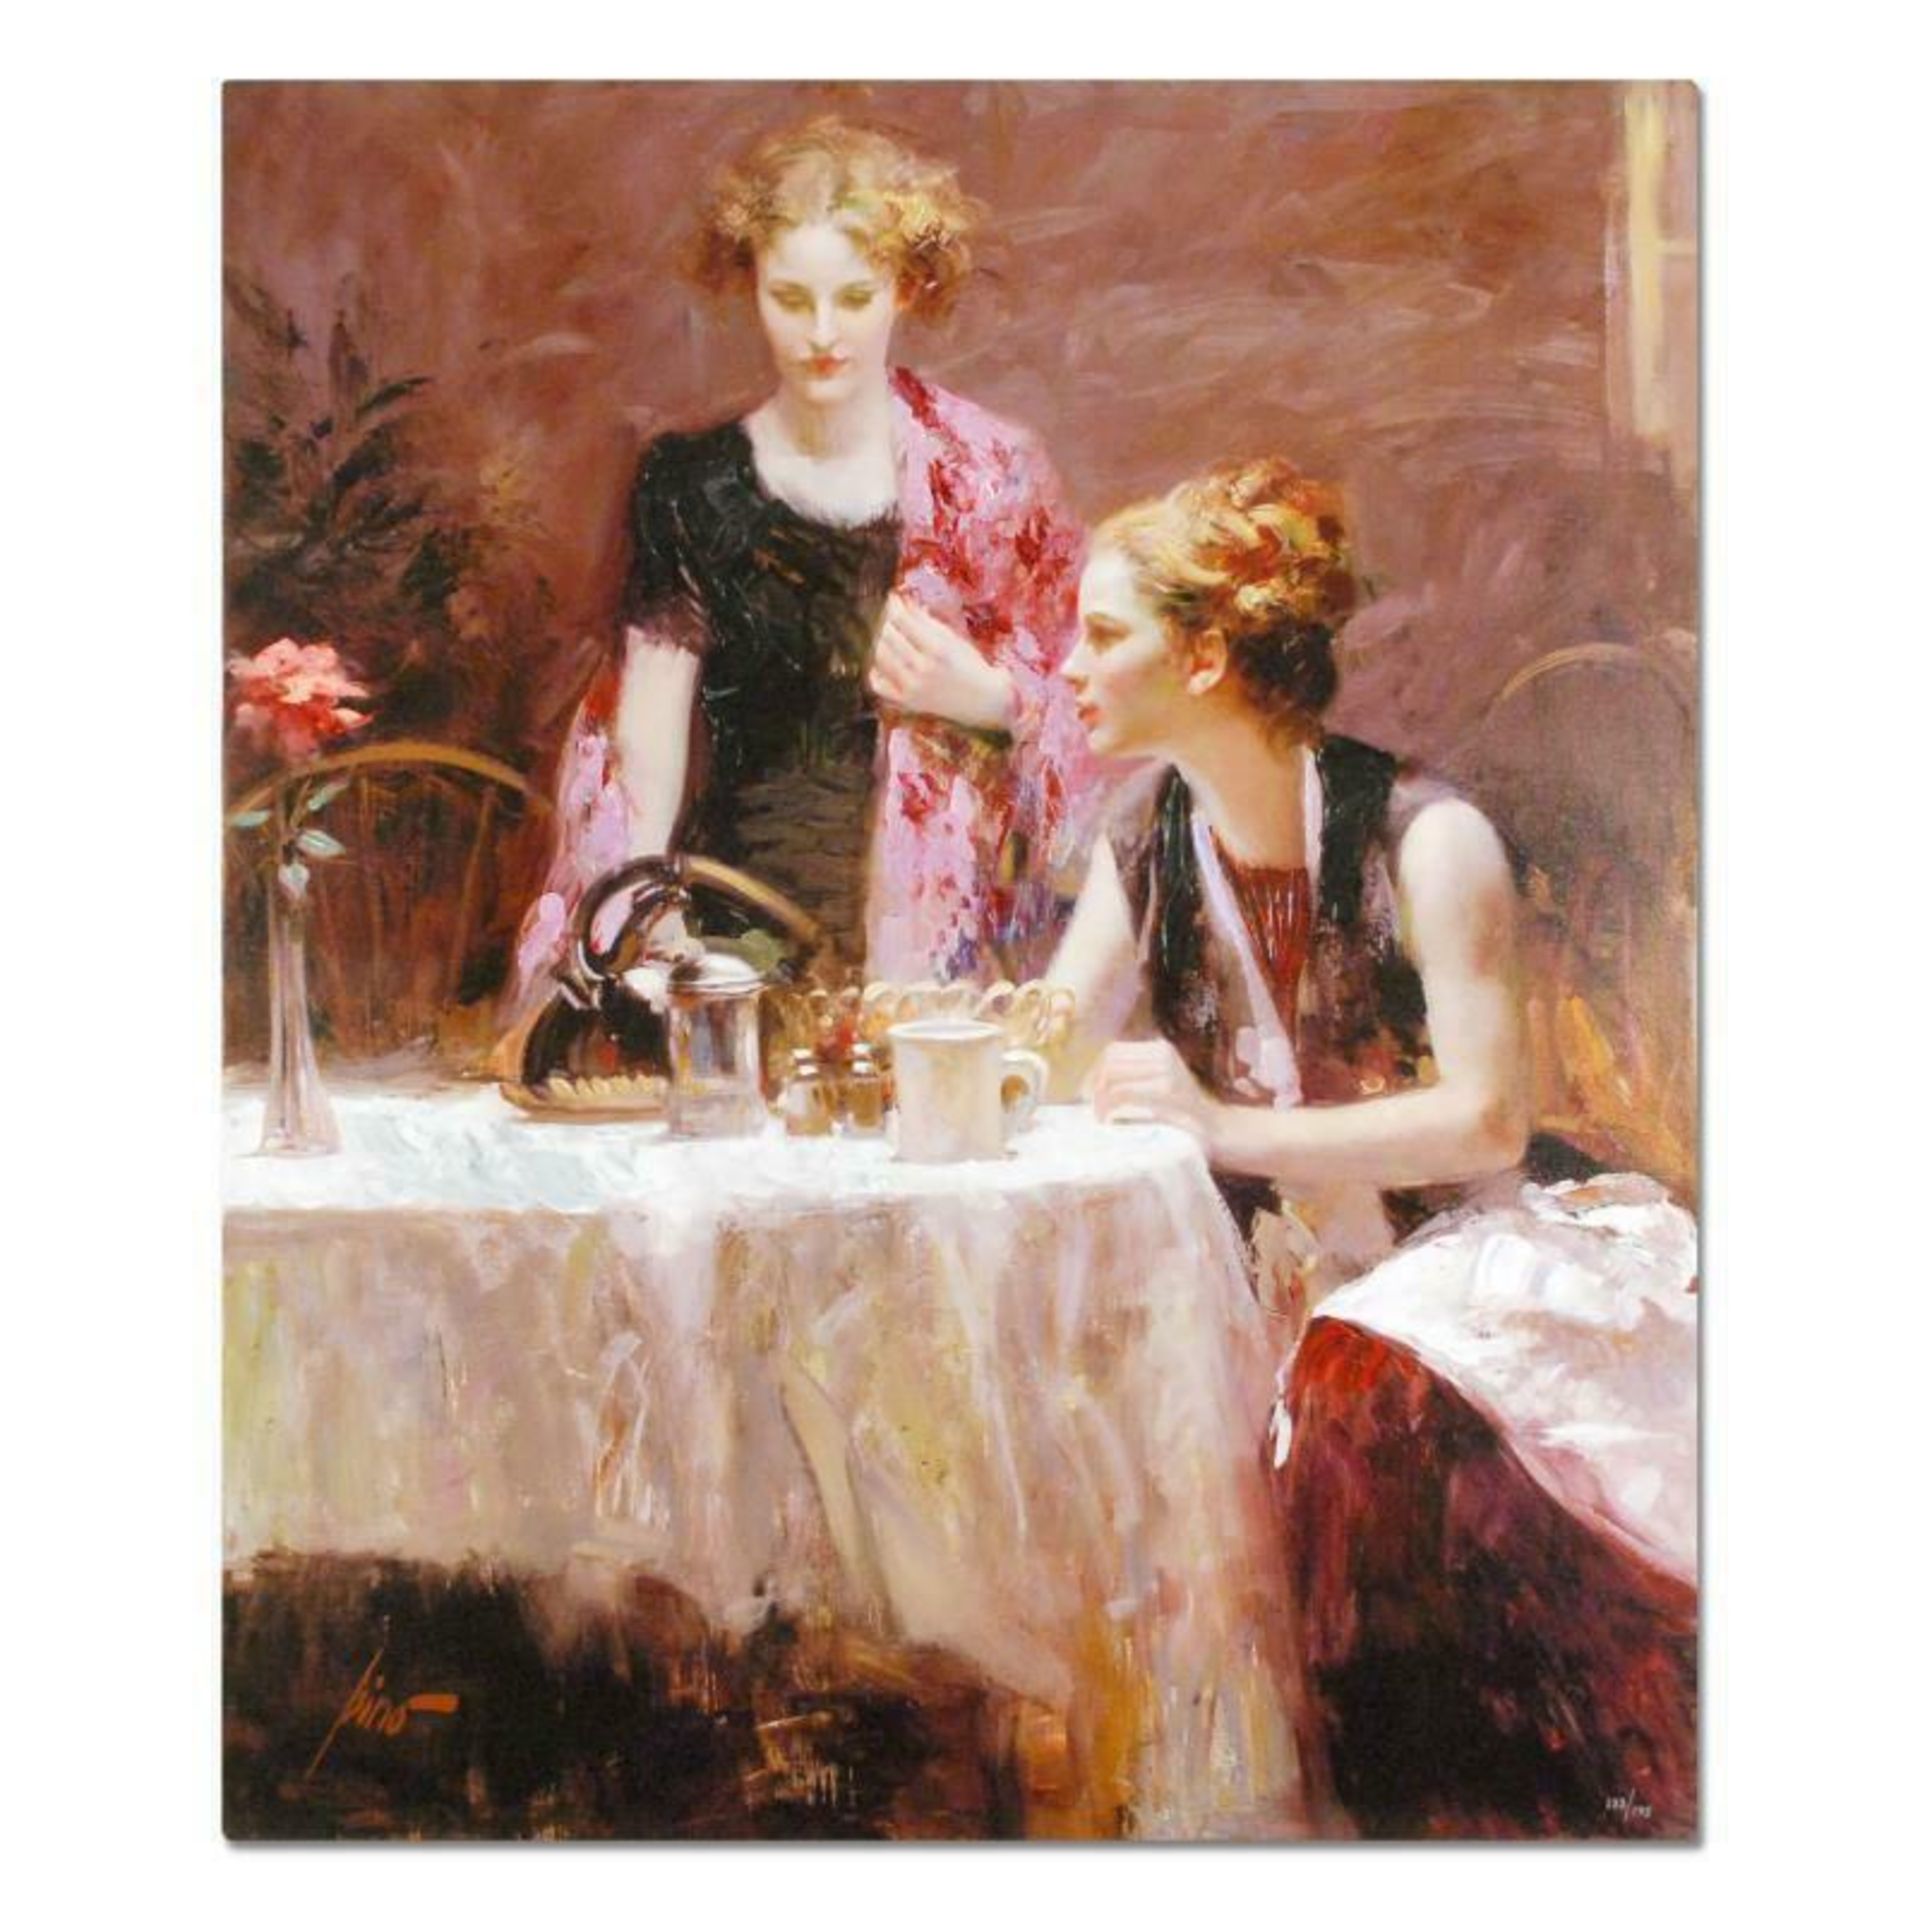 Pino (1939-2010), "After Dinner" Artist Embellished Limited Edition on Canvas, N